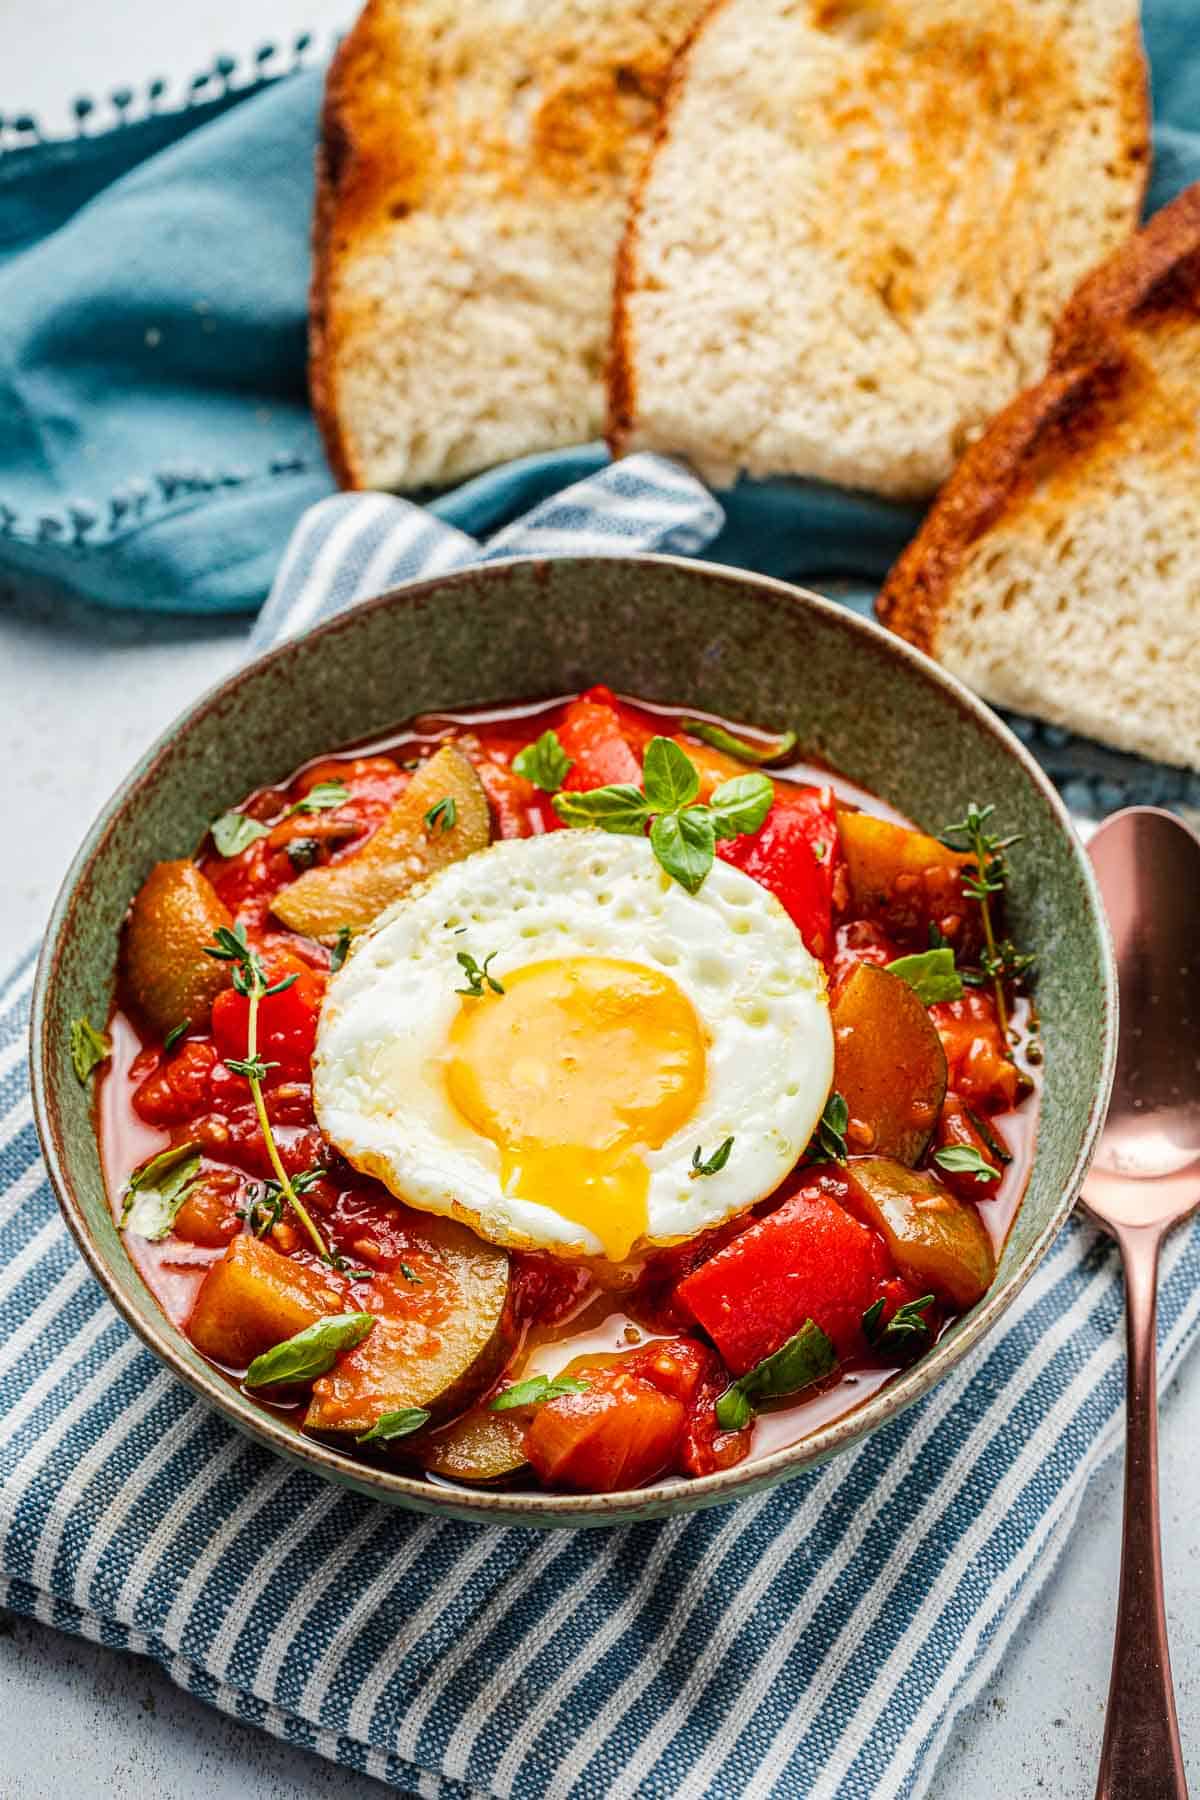 ratatouille topped with a fried egg in a bowl next to a spoon, and slices of toasted bread.